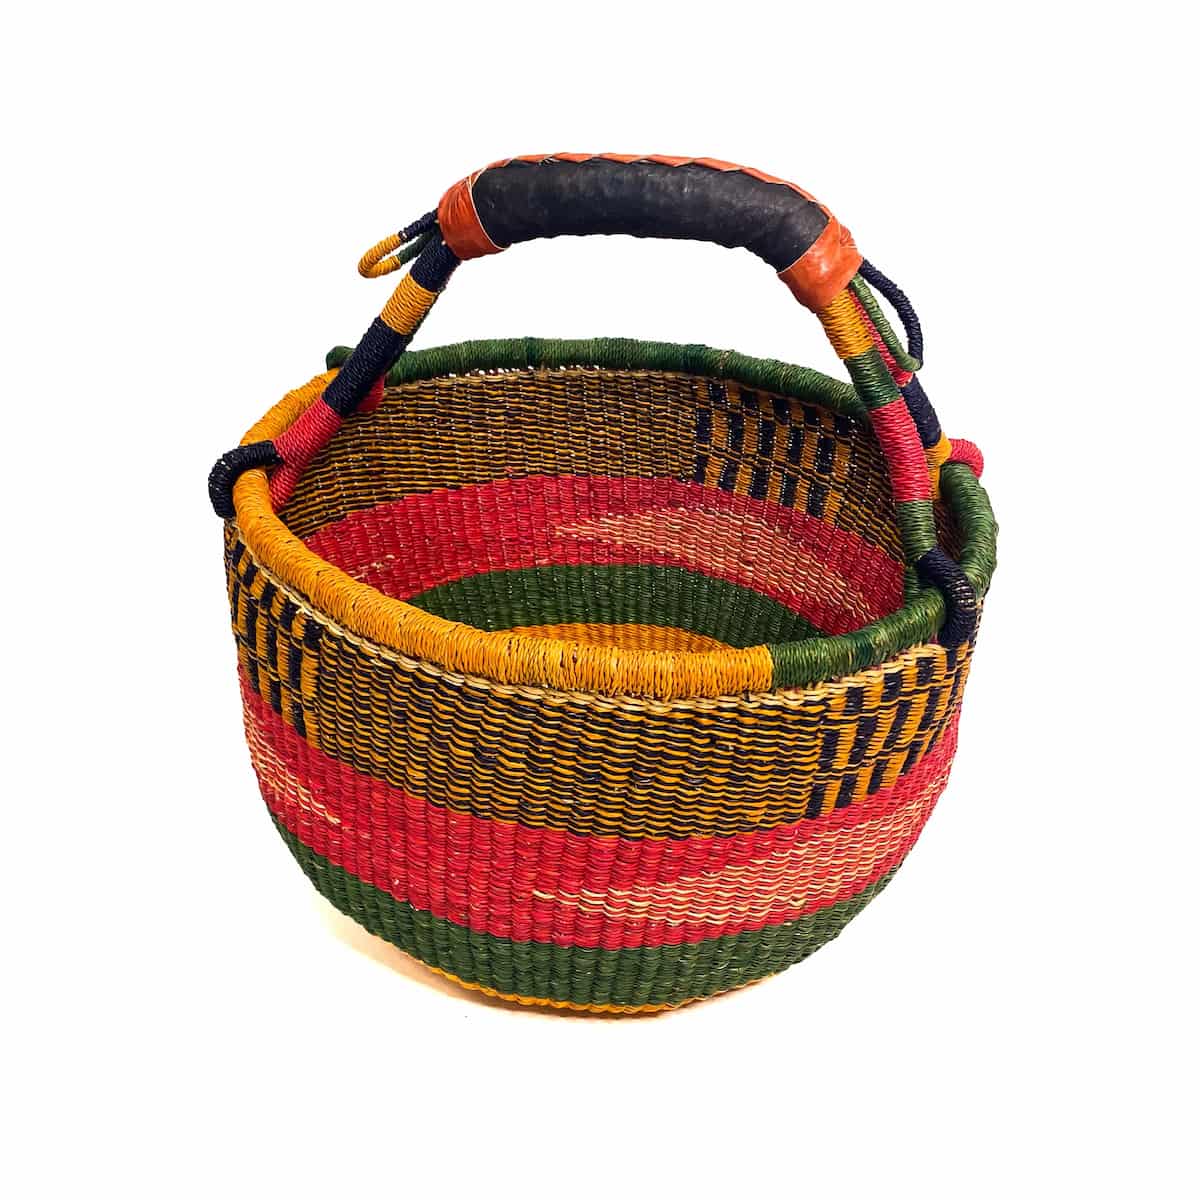 Round basket with one handle in red and yellow